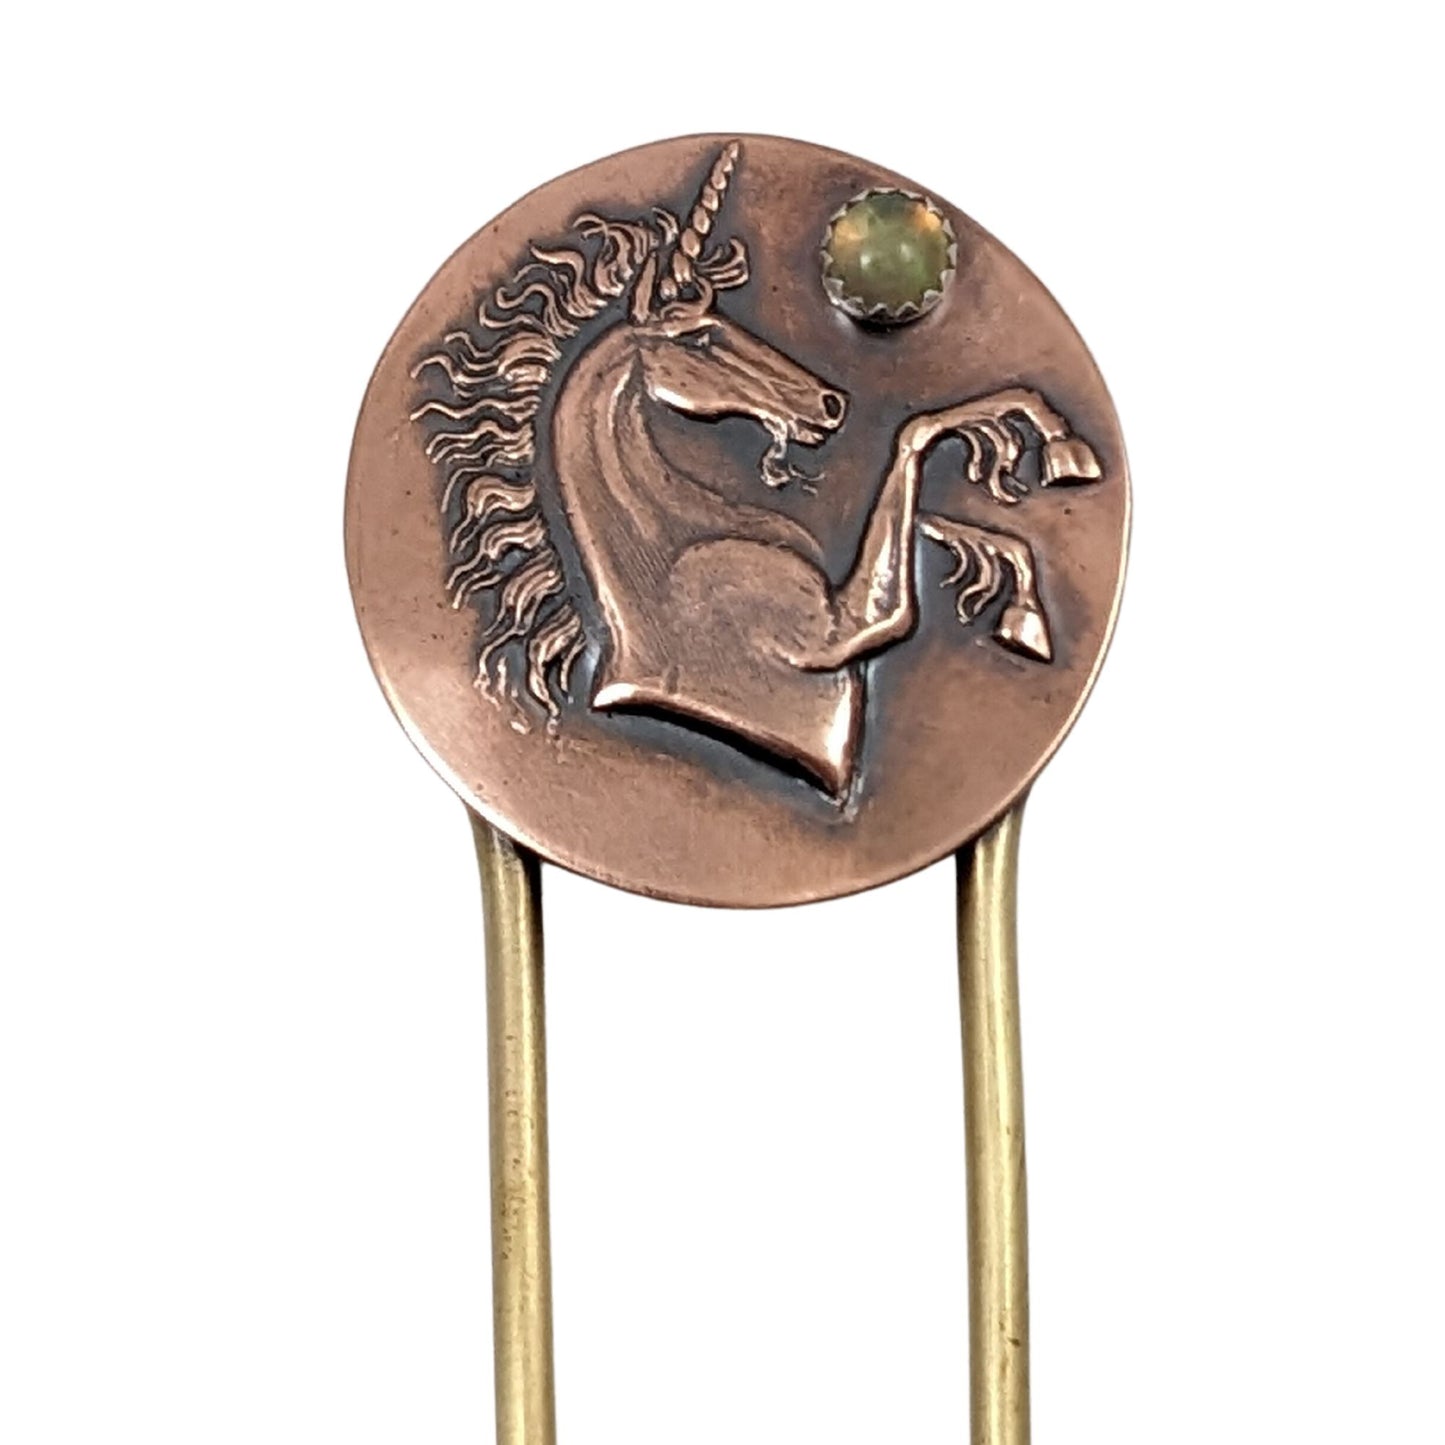 Brass hair fork with a copper design at the top. The copper is round with a raised impression of a unicorn. You can see the beard, detailed hair in the mane and on the ankles. The horn is spiraled. Above the nose there is a round gemstone meant to represent the moon.